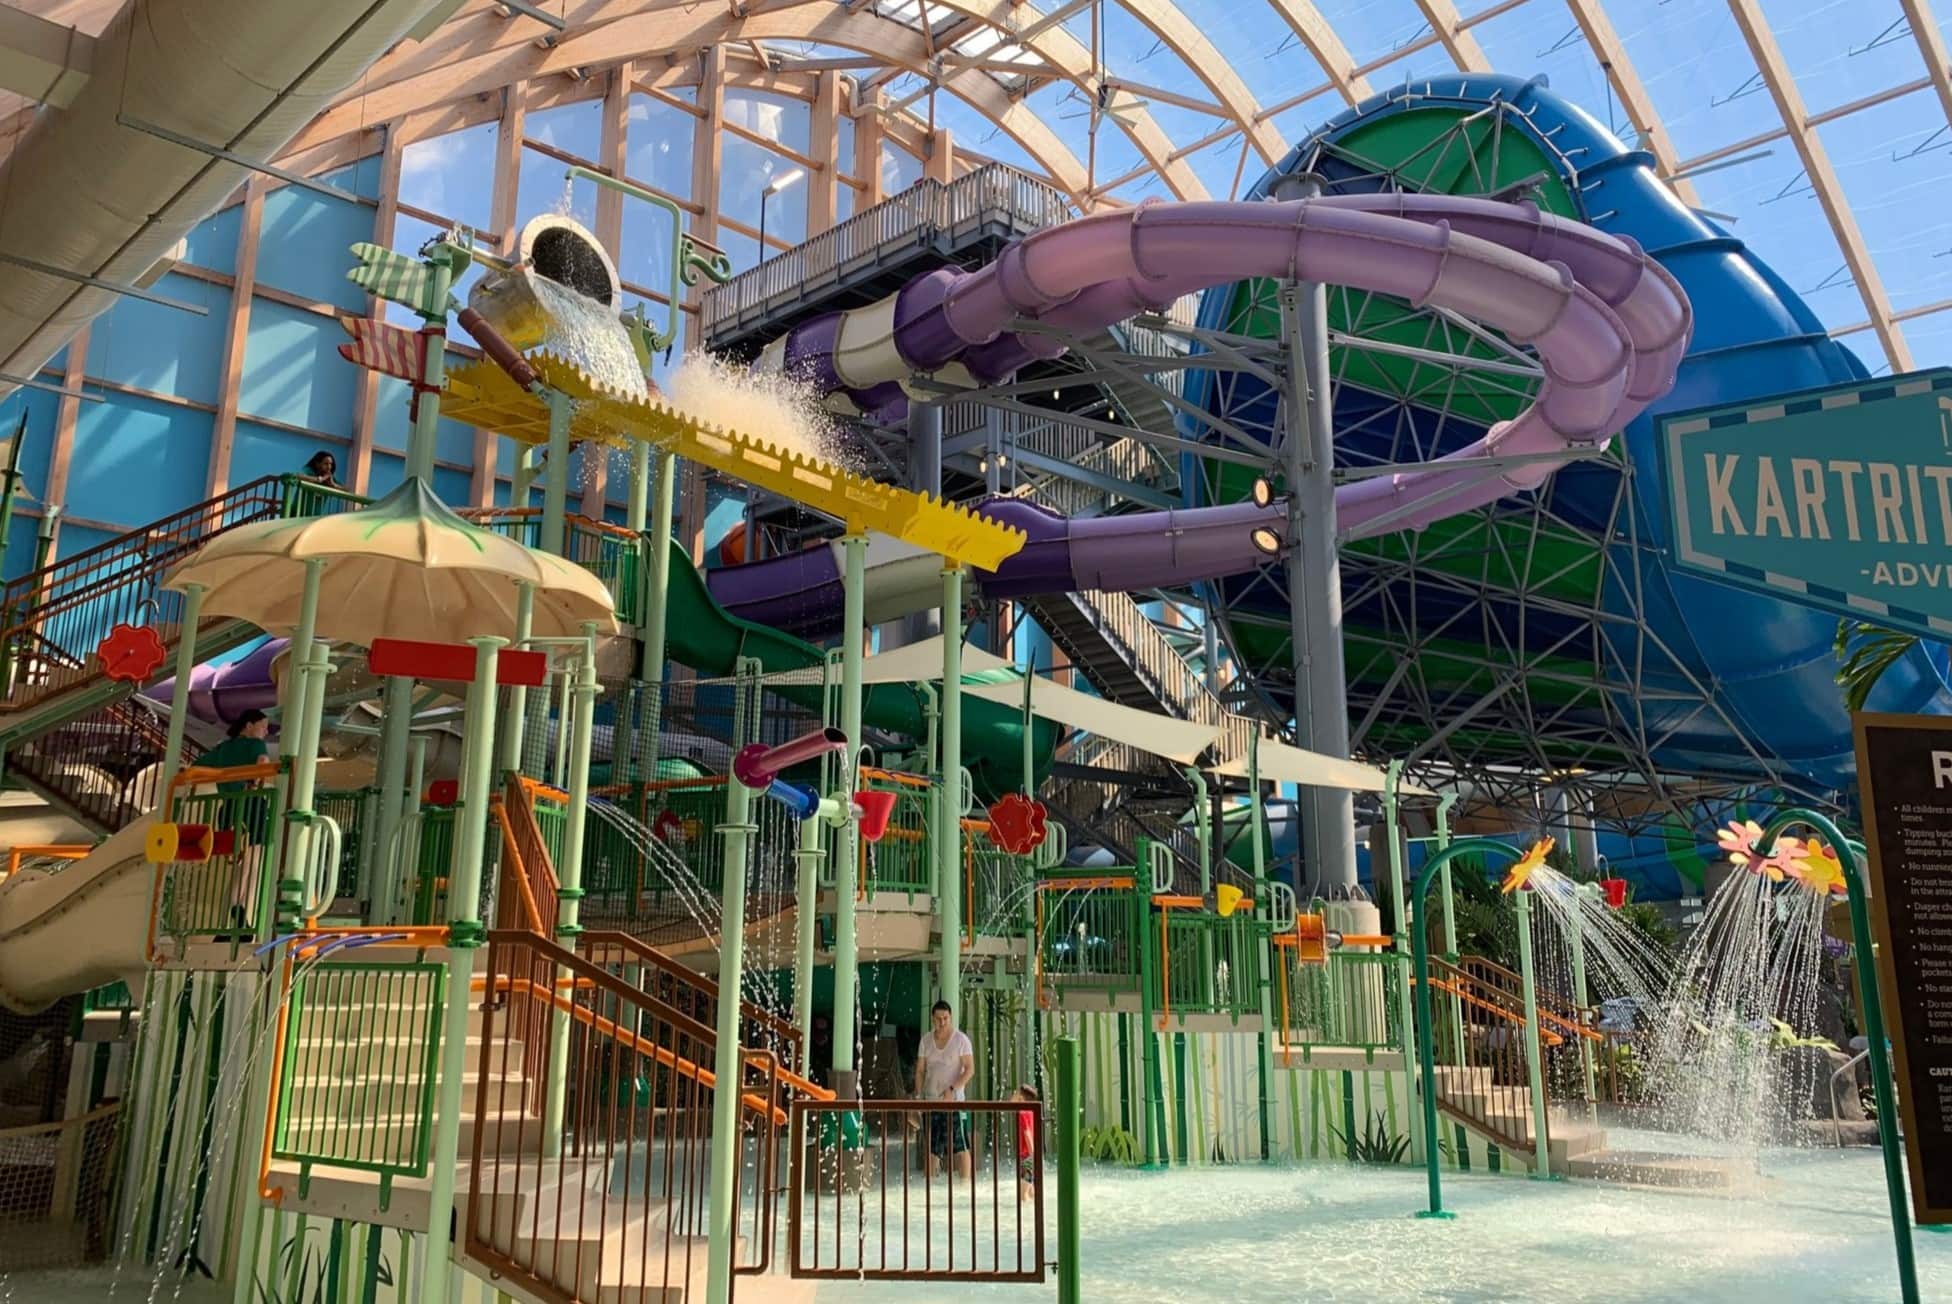 The Kartrite Indoor Waterpark: How Many Square Feet Is The Play Area?